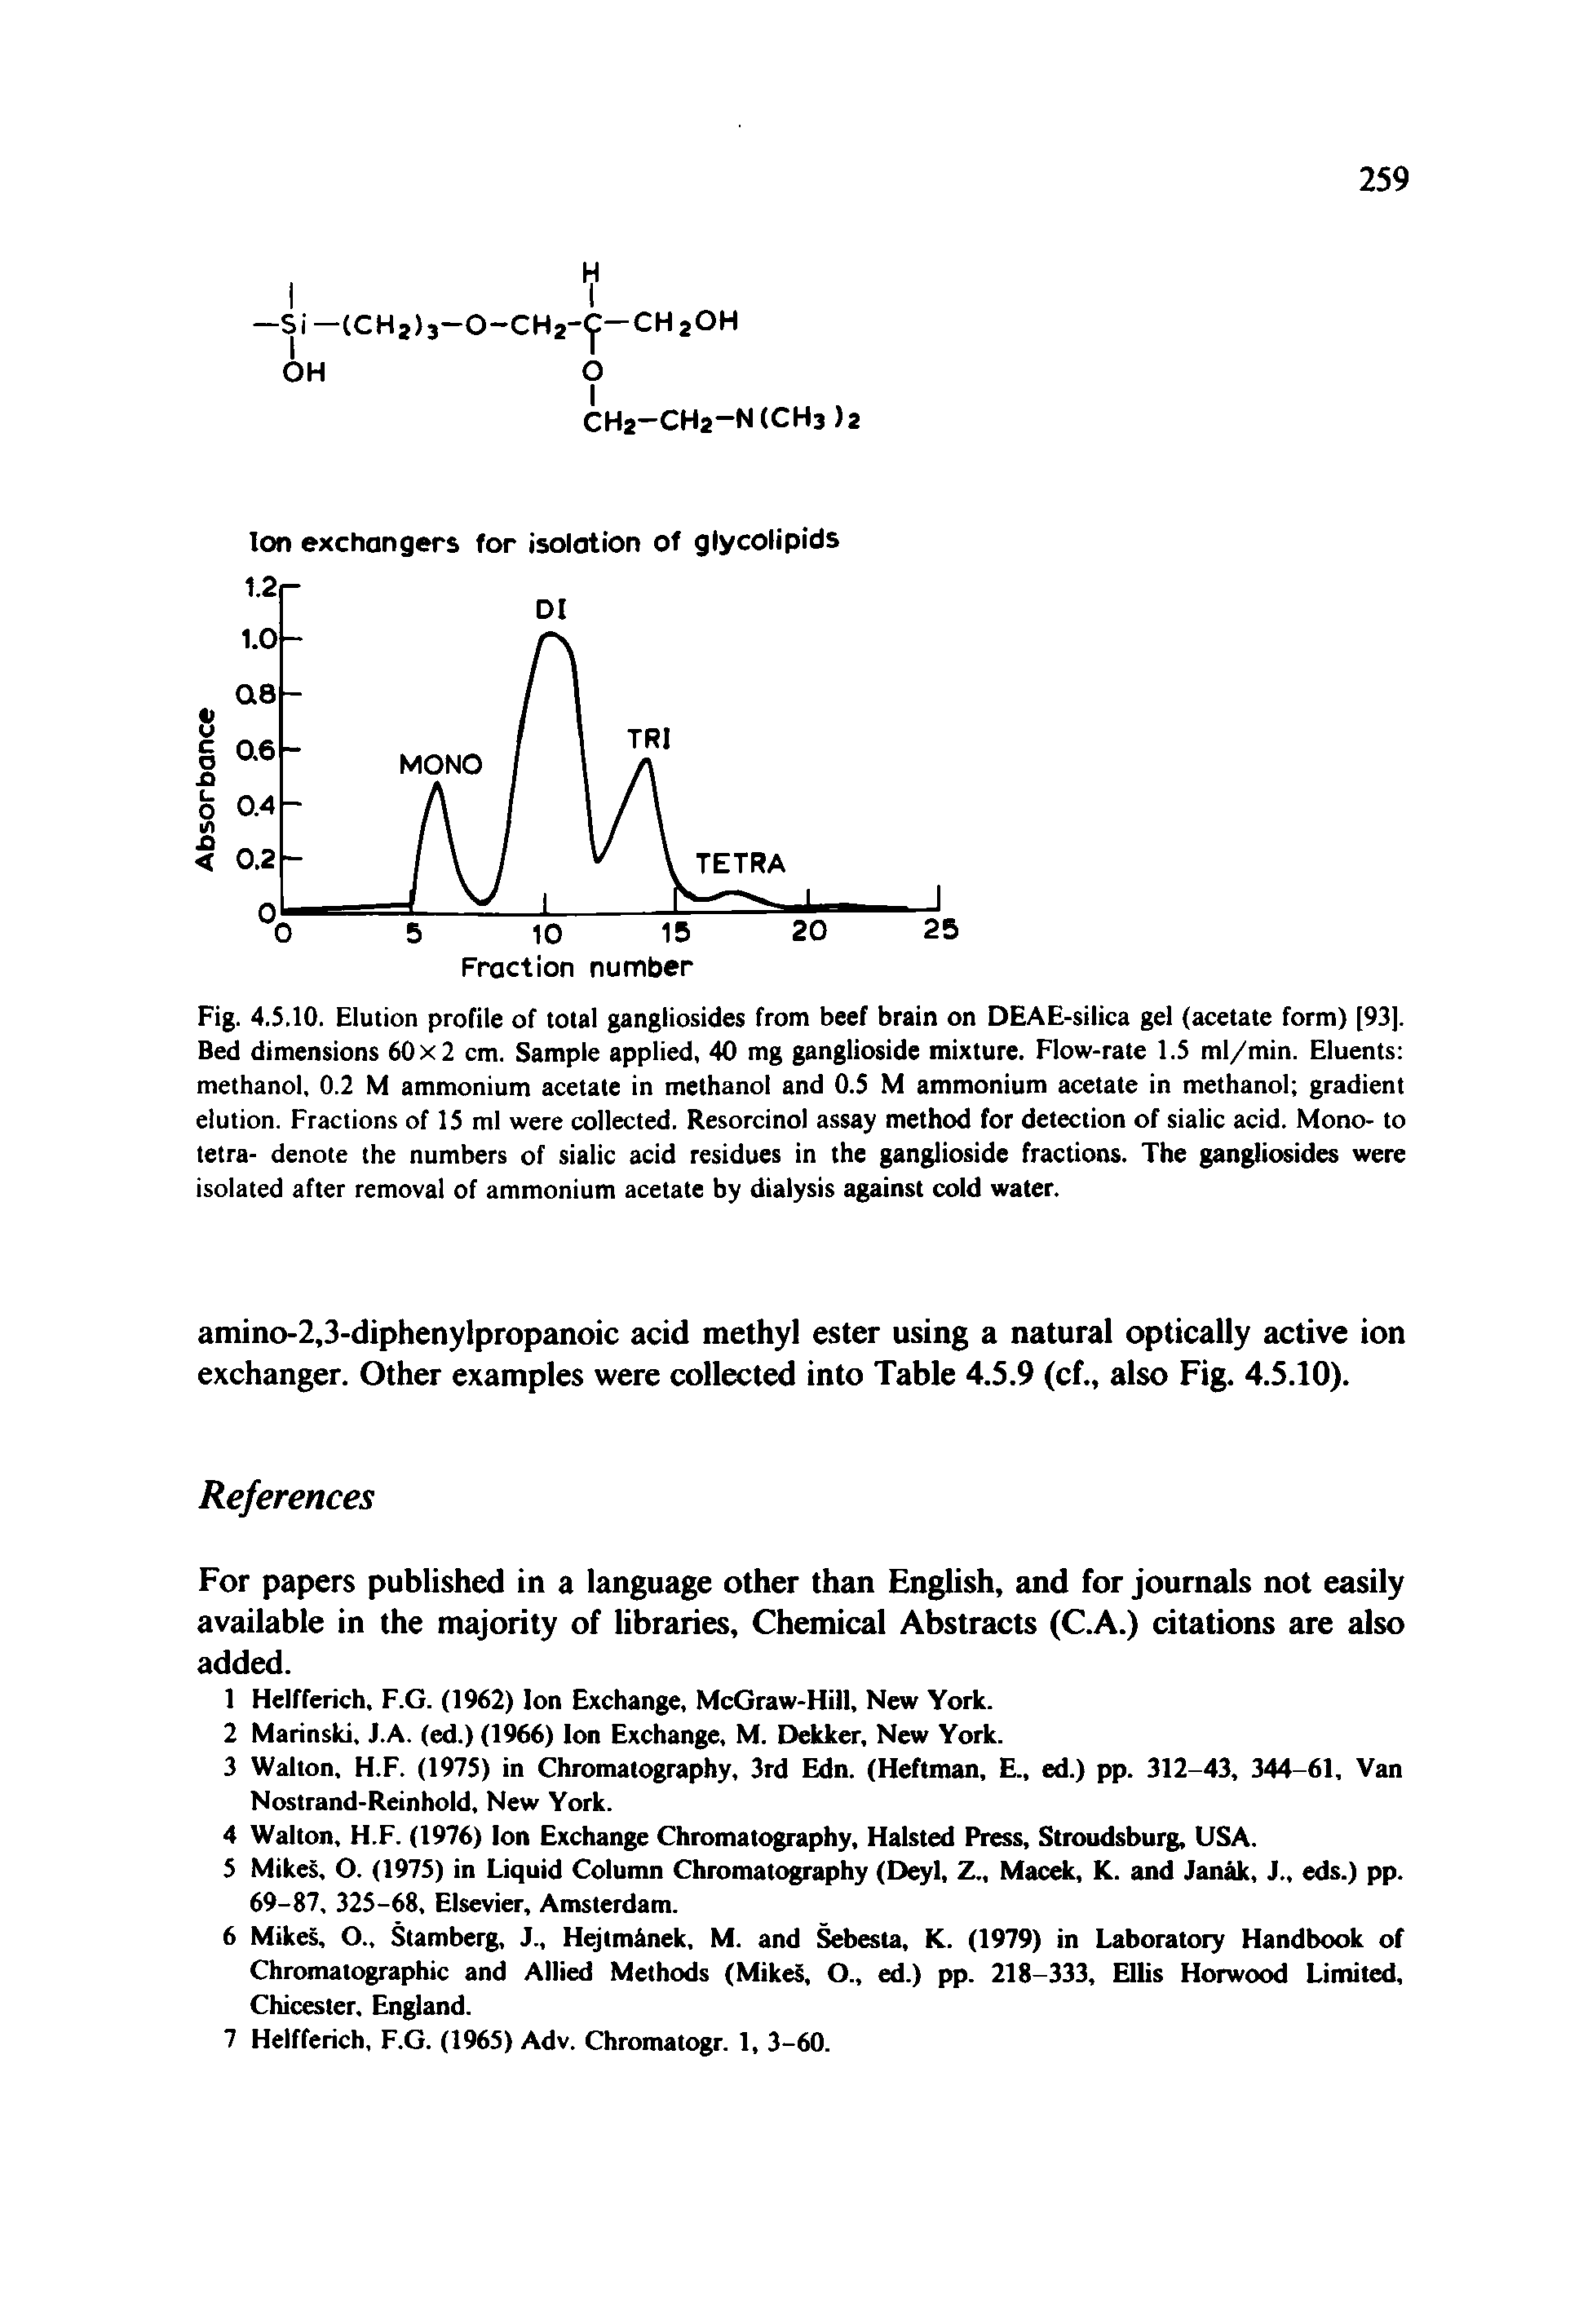 Fig. 4.5.10. Elution profile of total gangliosides from beef brain on DEAE-silica gel (acetate form) [93]. Bed dimensions 60x2 cm. Sample applied, 40 mg ganglioside mixture. Flow-rate 1.5 ml/min. Eluents methanol, 0.2 M ammonium acetate in methanol and 0.5 M ammonium acetate in methanol gradient elution. Fractions of 15 ml were collected. Resorcinol assay method for detection of sialic acid. Mono- to tetra- denote the numbers of sialic acid residues in the ganglioside fractions. The gangliosides were isolated after removal of ammonium acetate by dialysis against cold water.